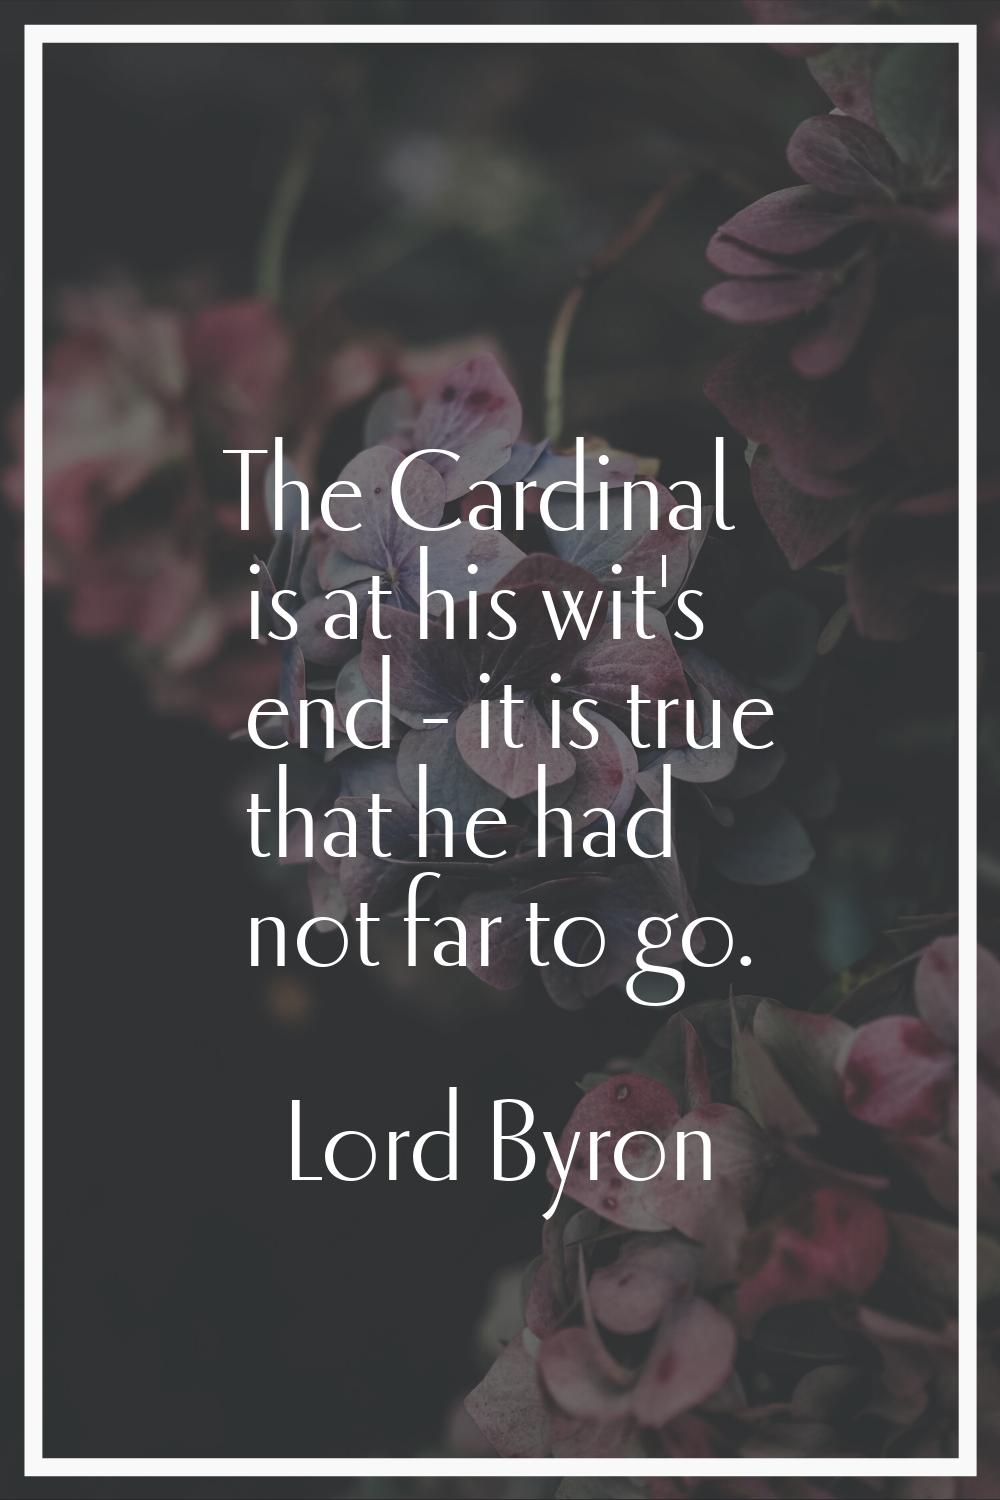 The Cardinal is at his wit's end - it is true that he had not far to go.